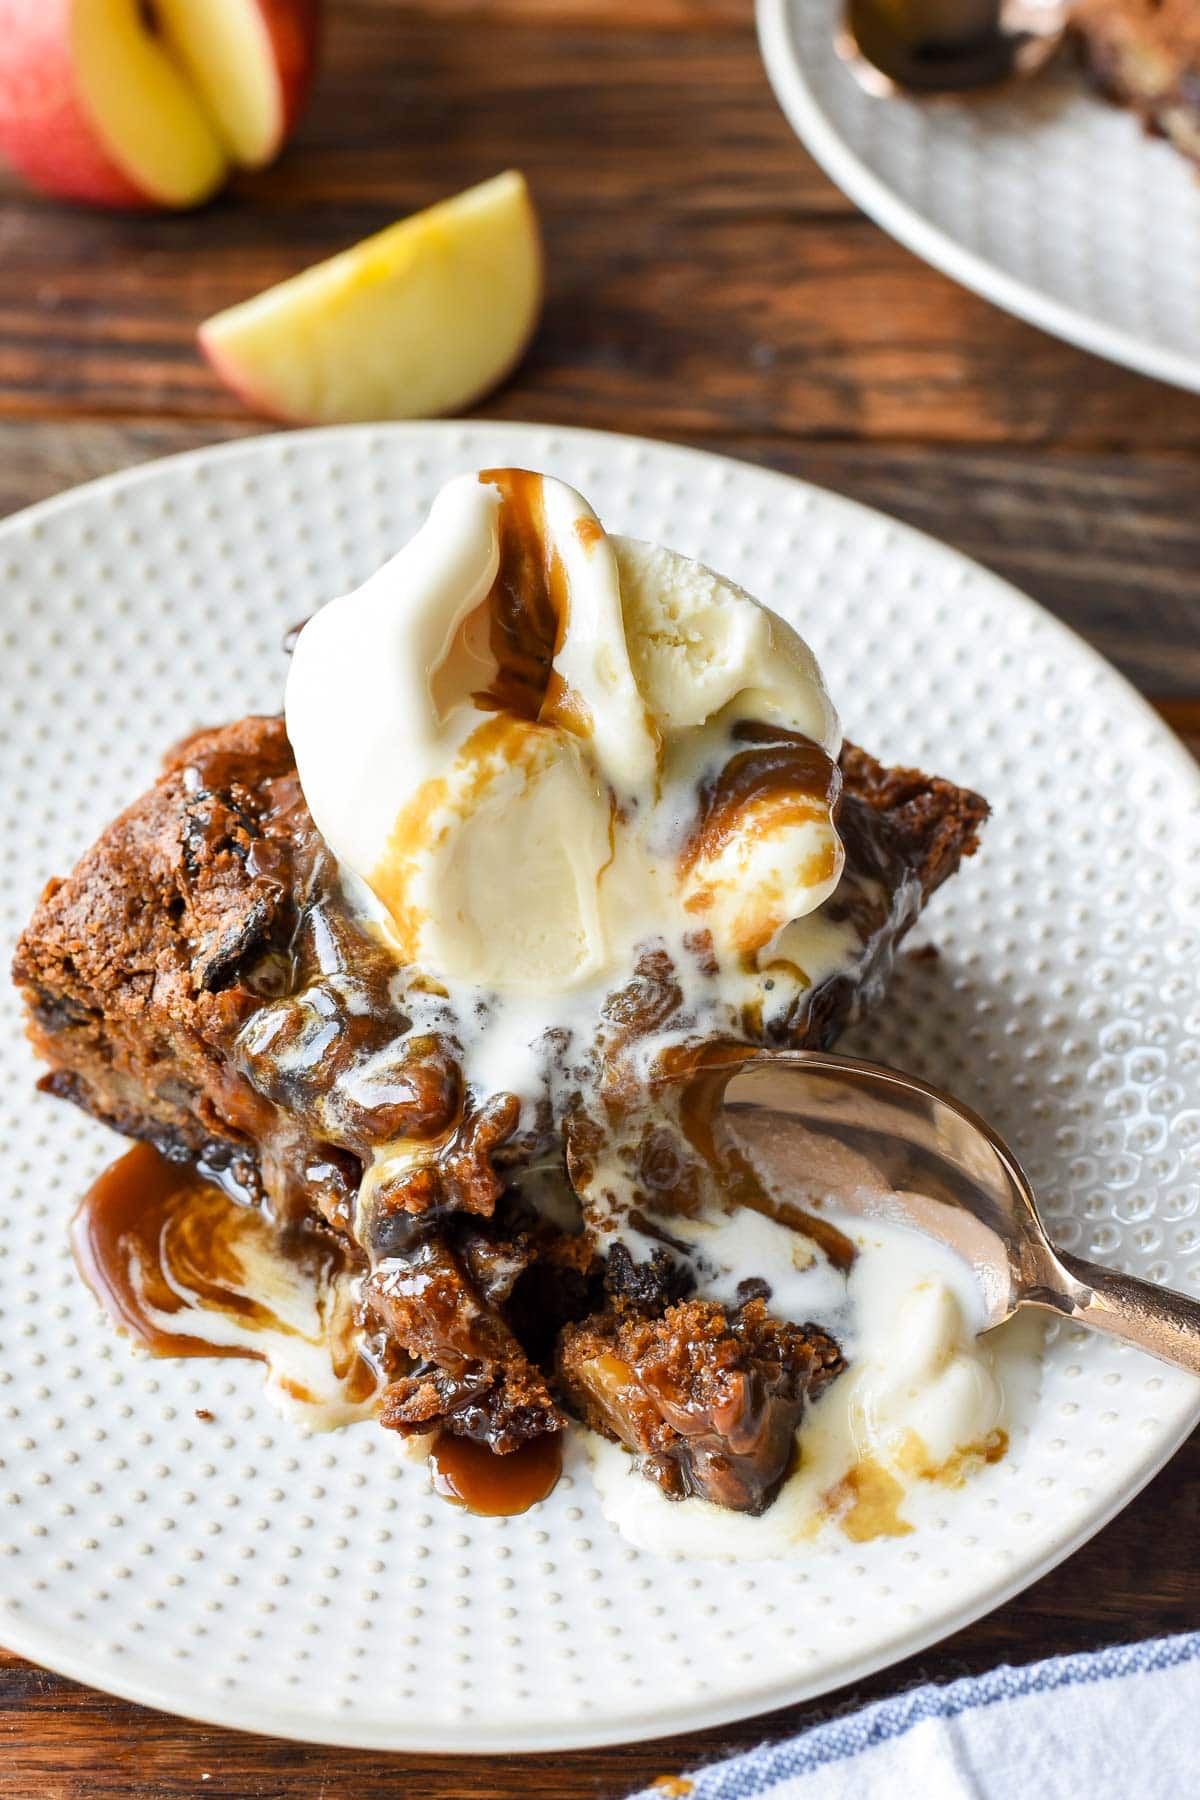 a spoon scoops a bite of of spiced apple cake, covered in ice cream and caramel sauce